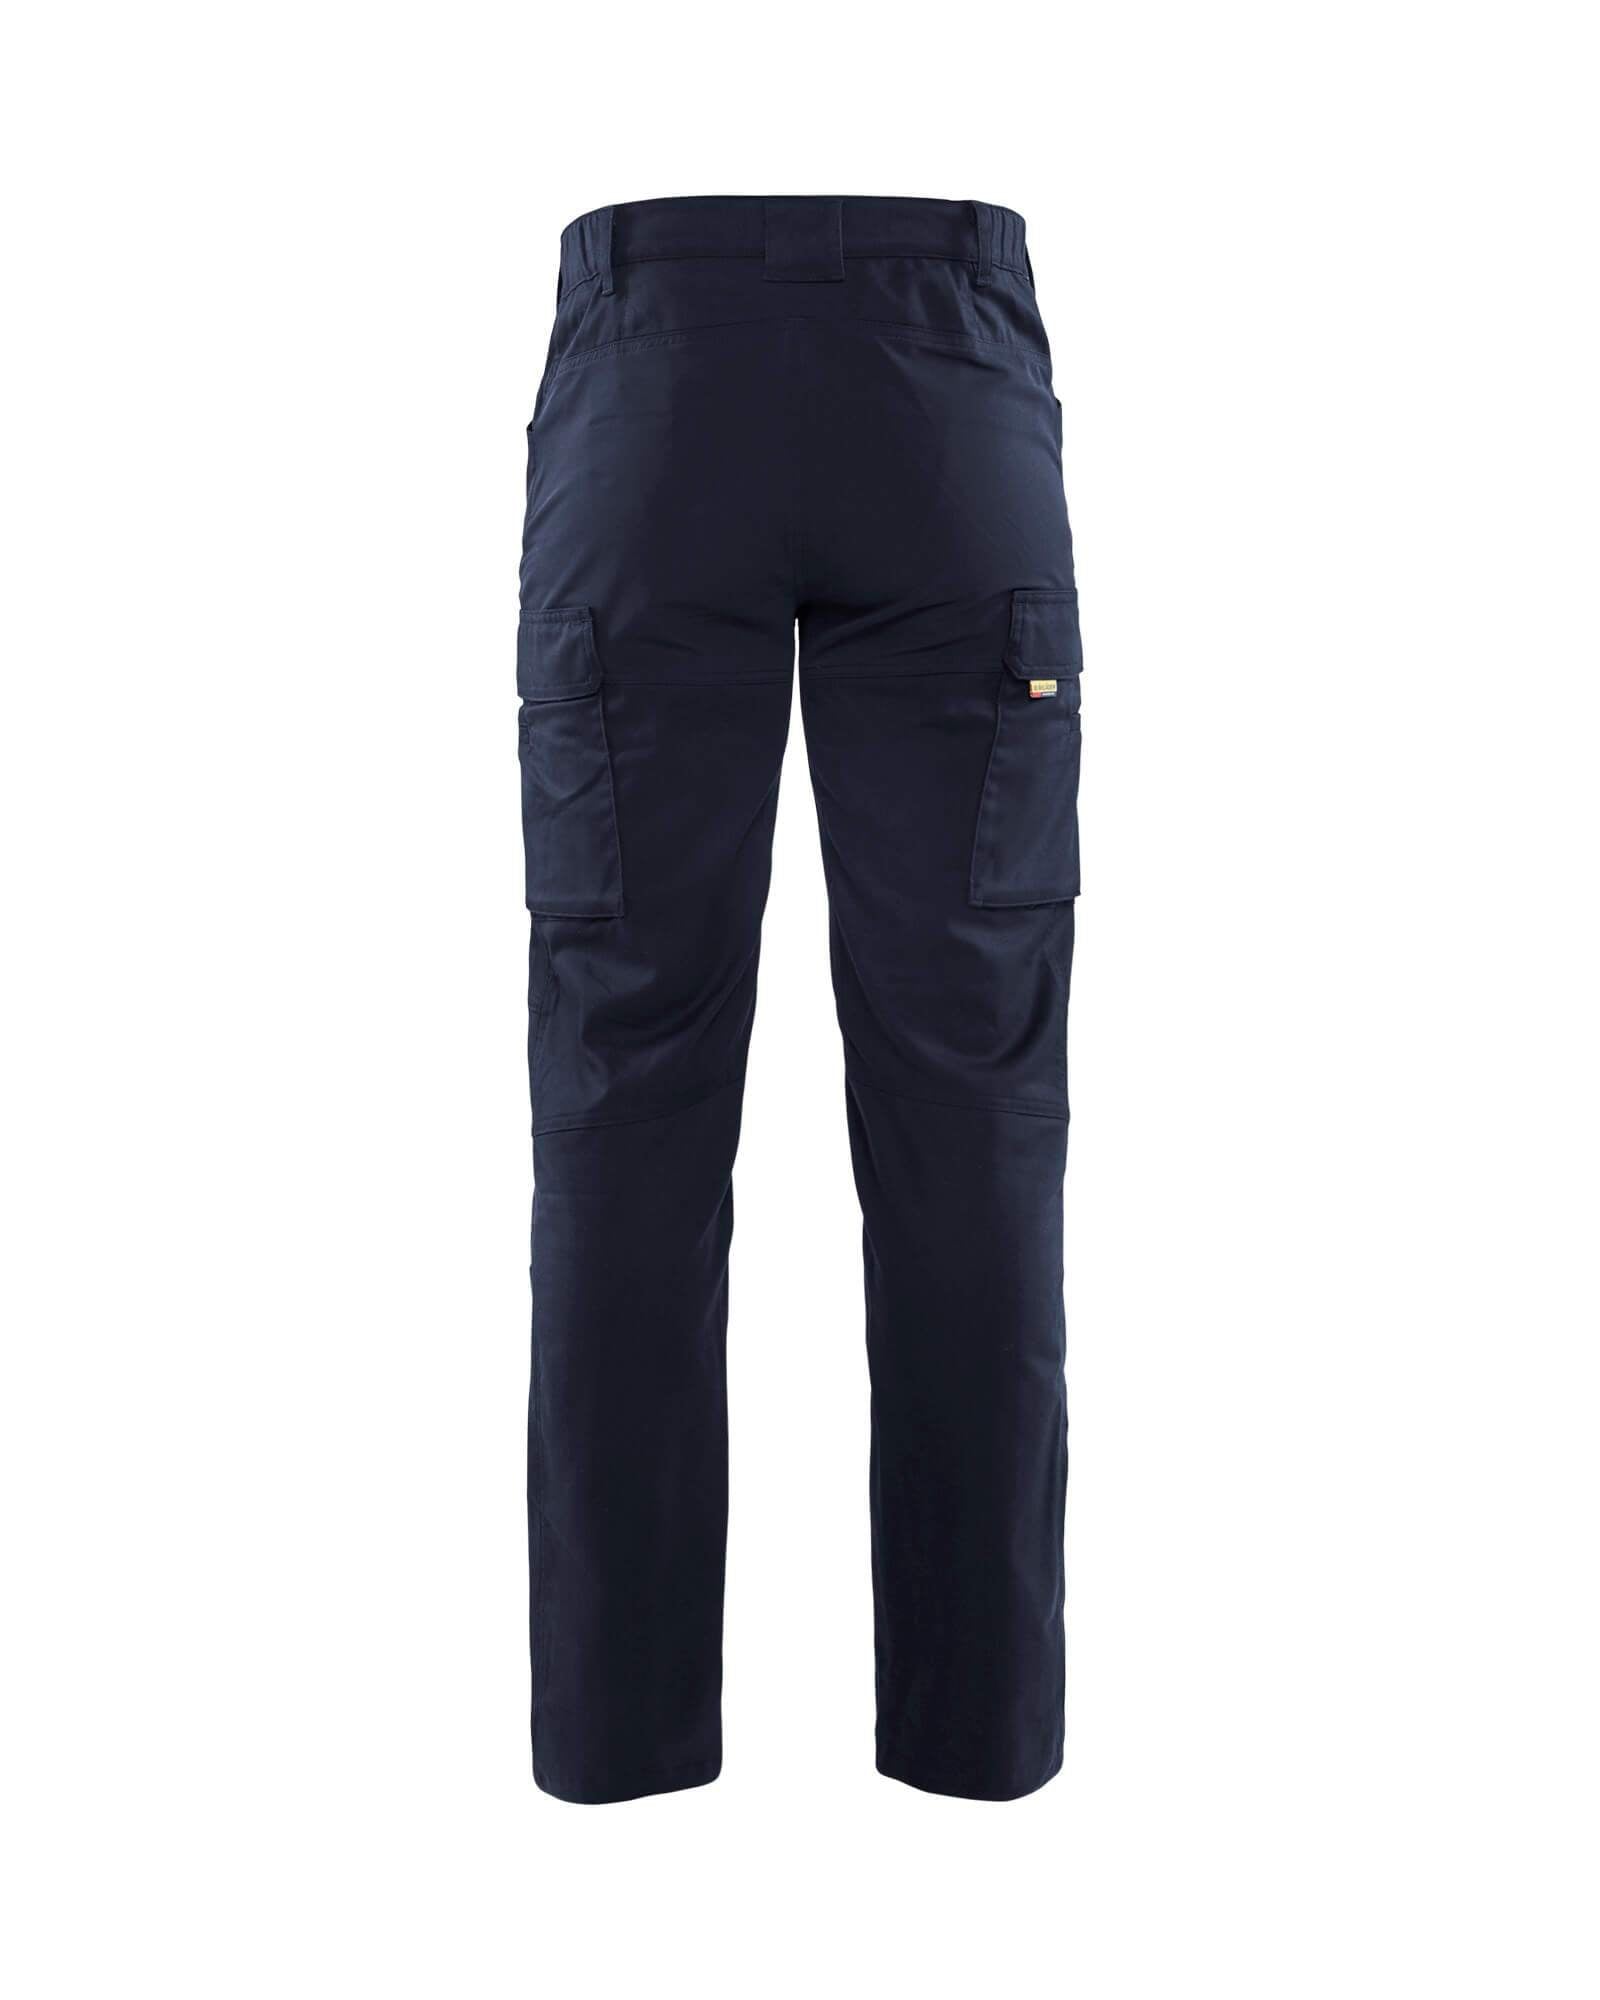 Snickers Workwear Ísland fyrir fagfólk - Slim fit work trousers in stretch.  Strategically placed 4-way stretch at the back and gusset in crotch for  extra flexibility and comfort. 6341 AllroundWork, Stretch Trousers.